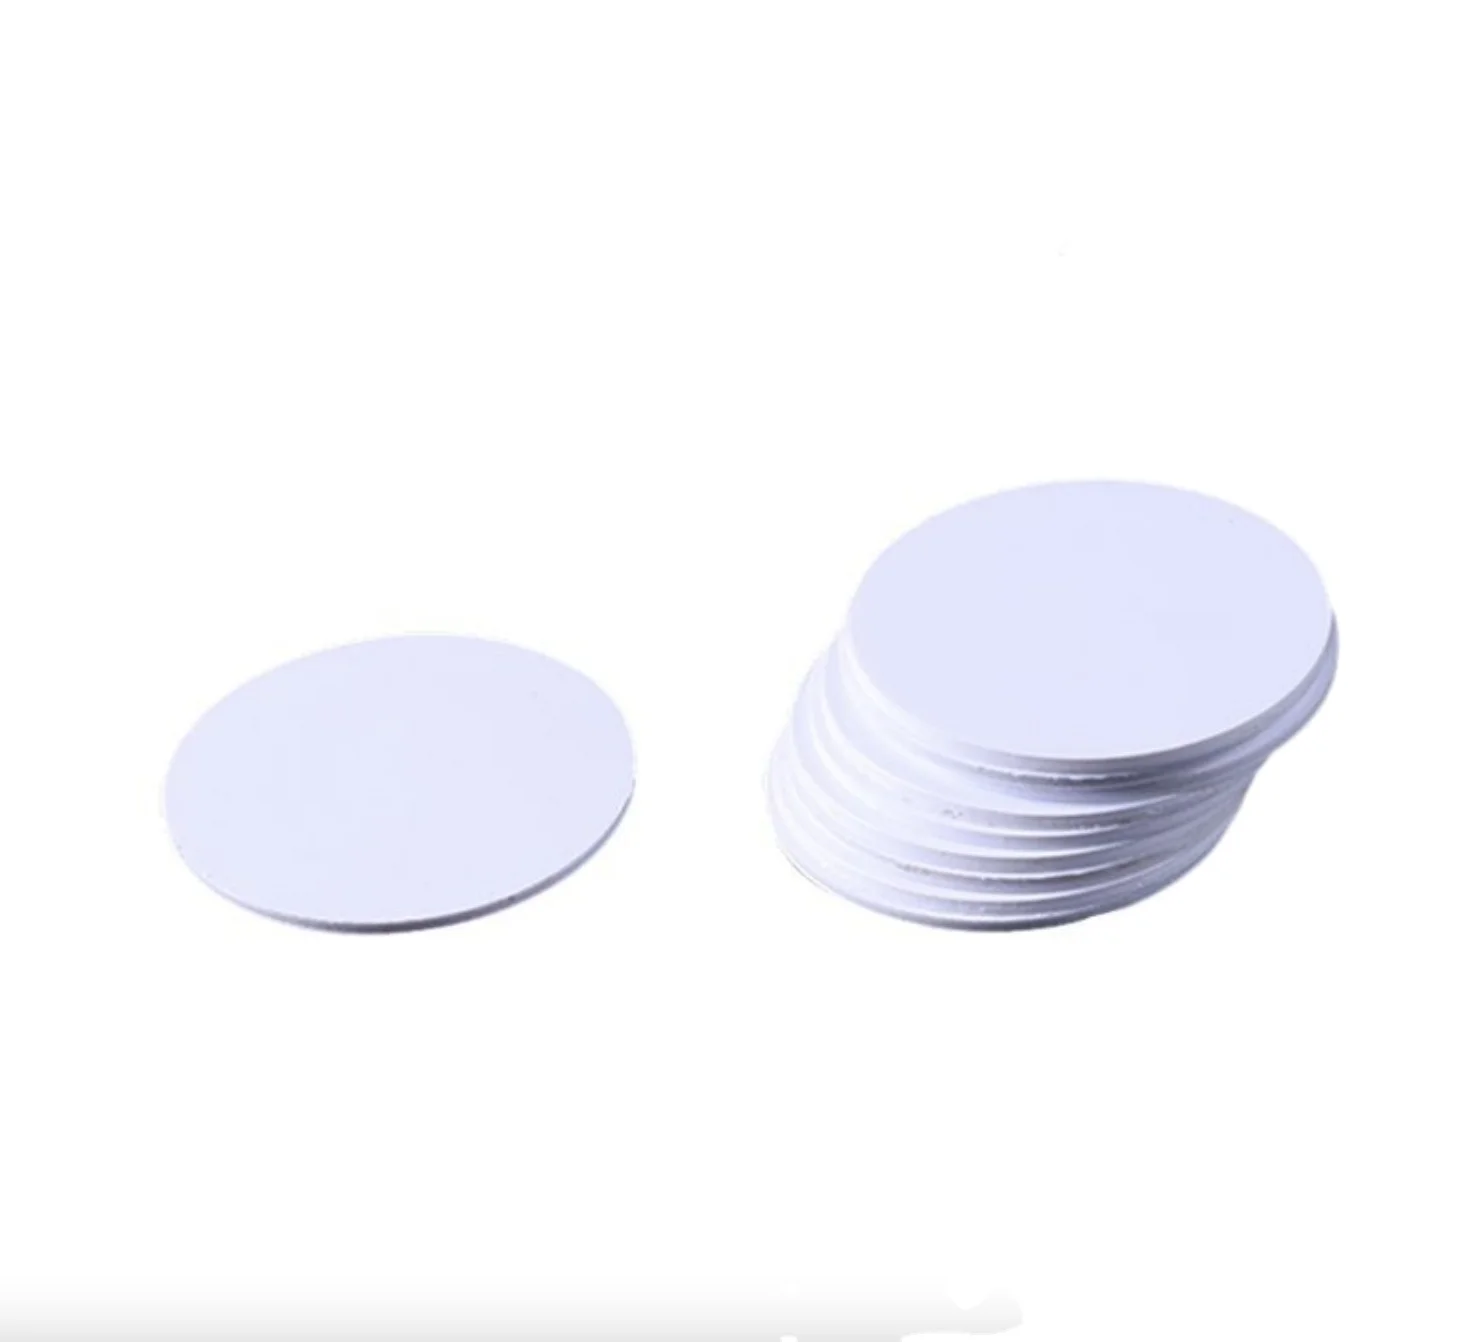 25mm White NFC Stickers Label RFID Tags and All NFC Phones